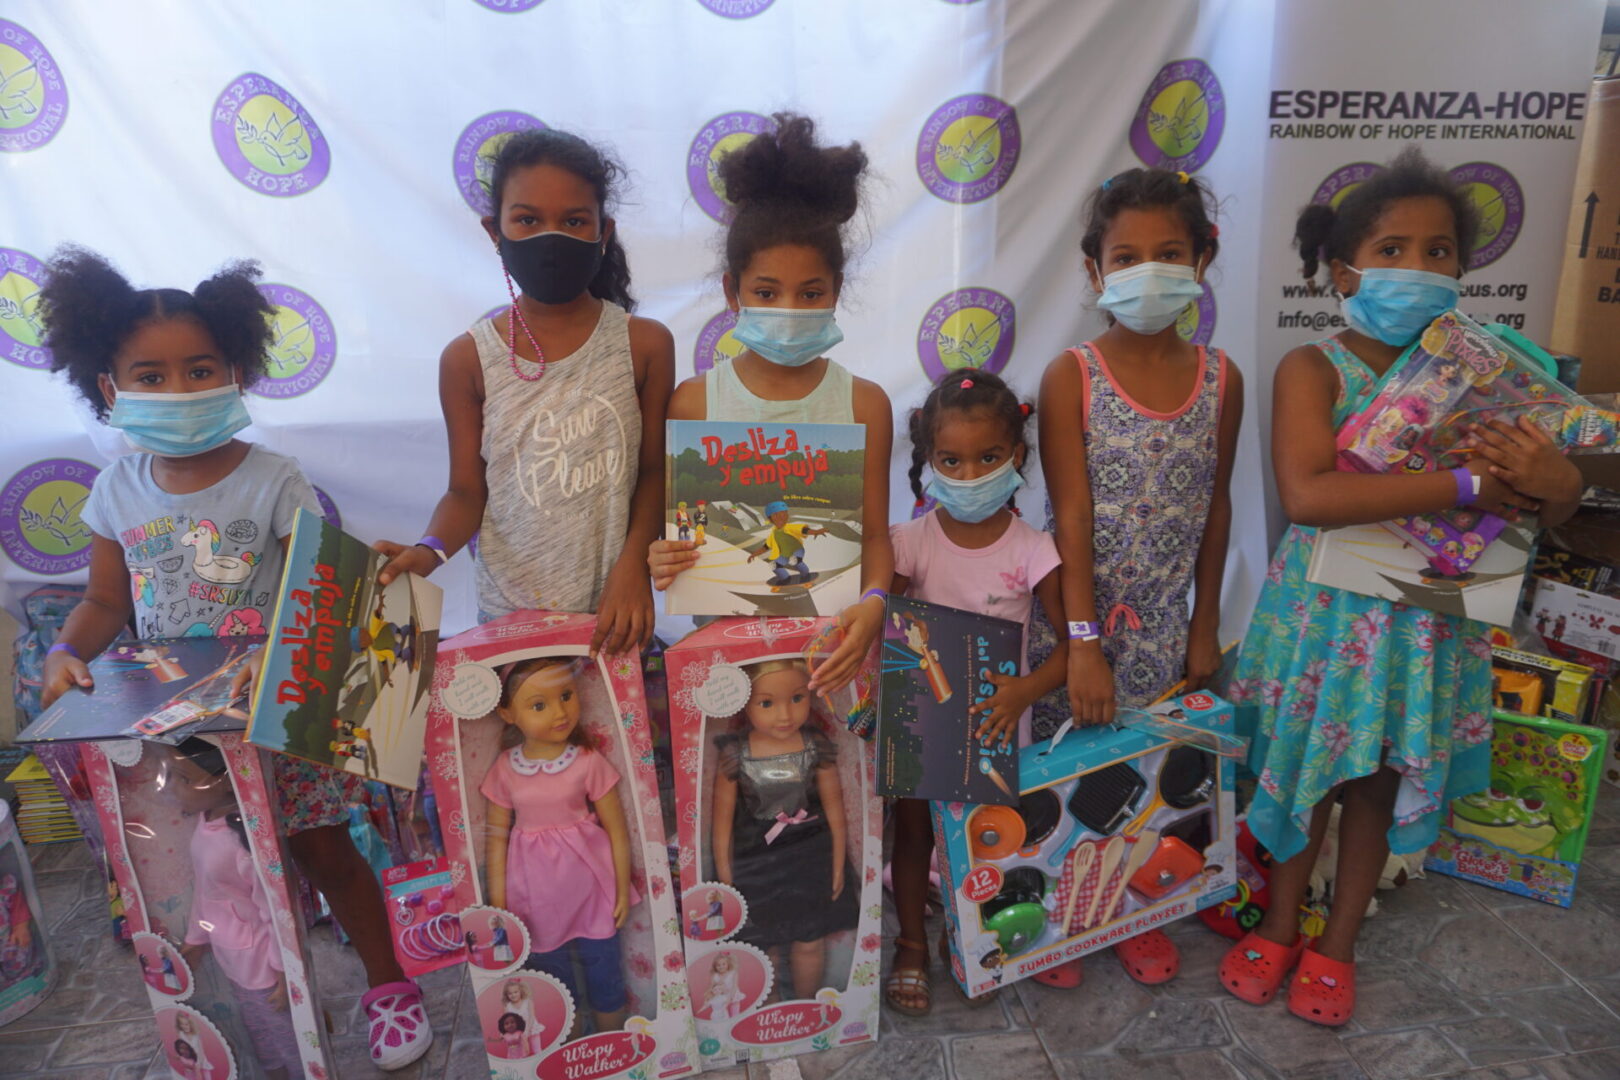 Six girls standing against the Esperanza-Hope backdrop with their toys and books, batch 2